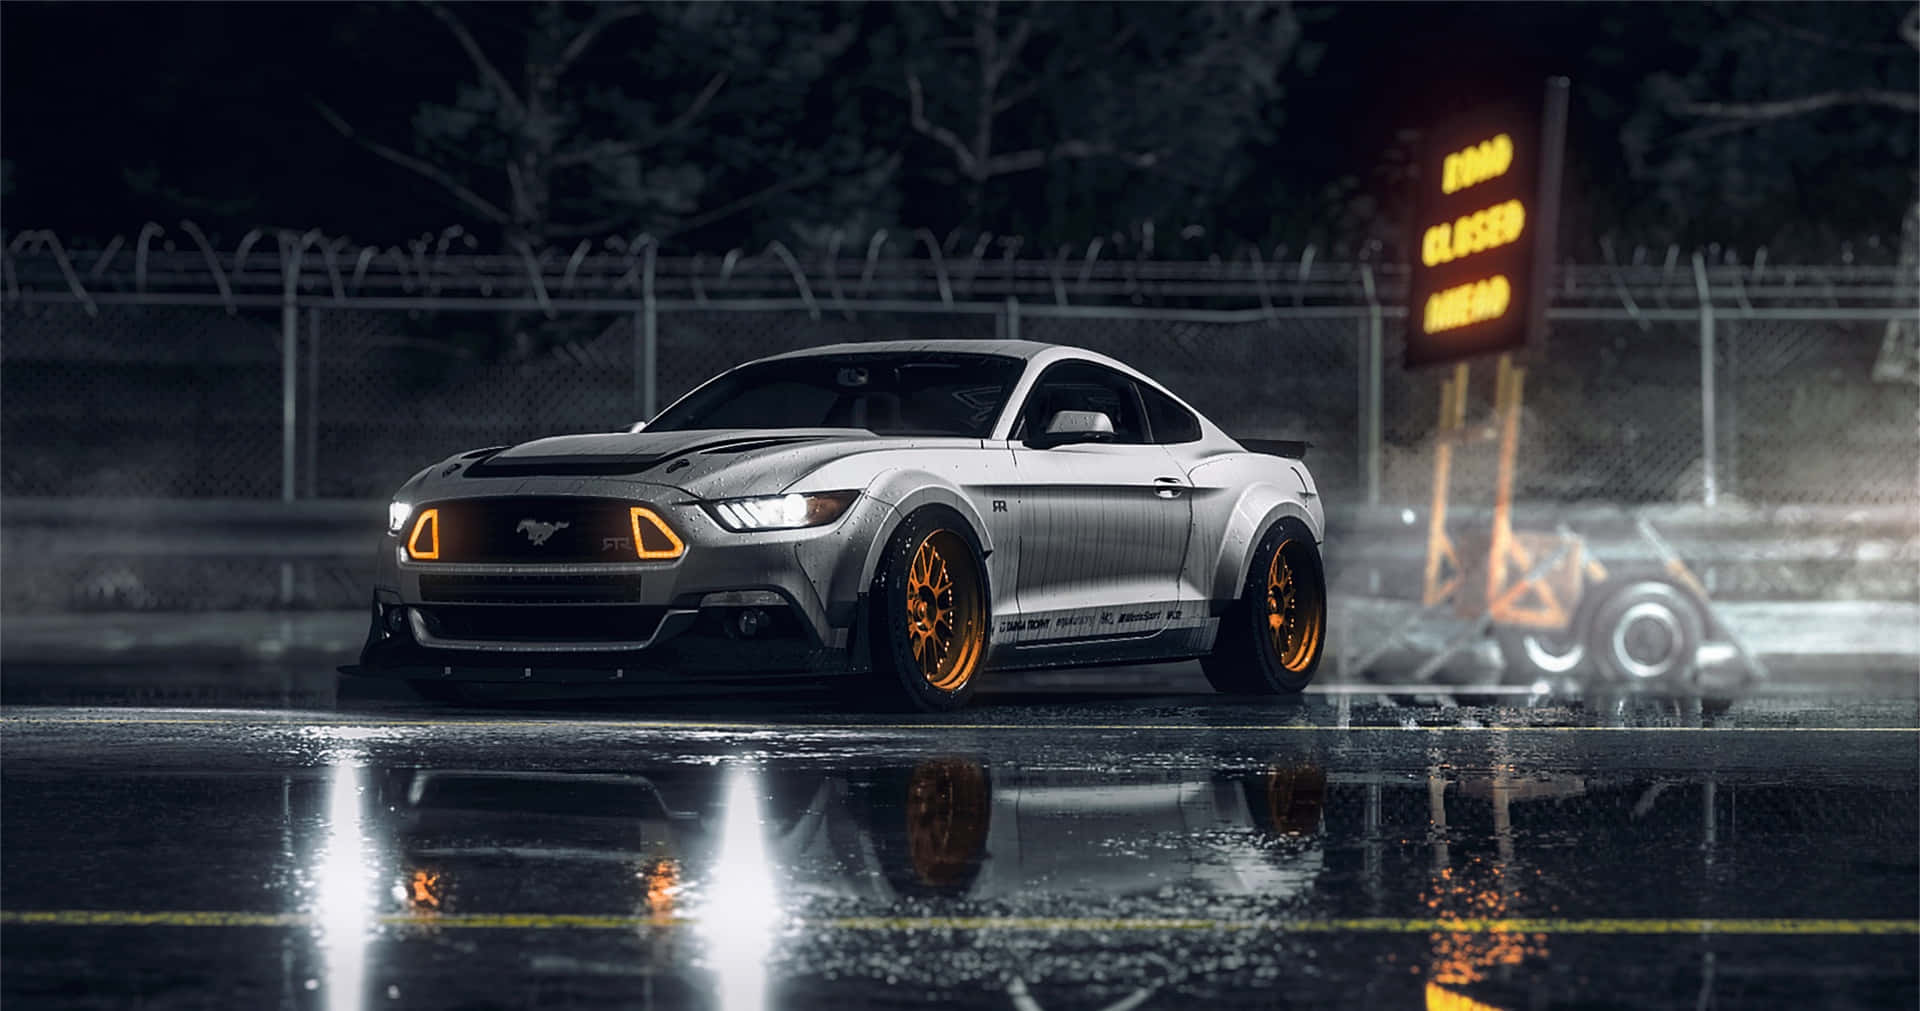 2015ford Mustang Im Need For Speed Pc Wallpaper